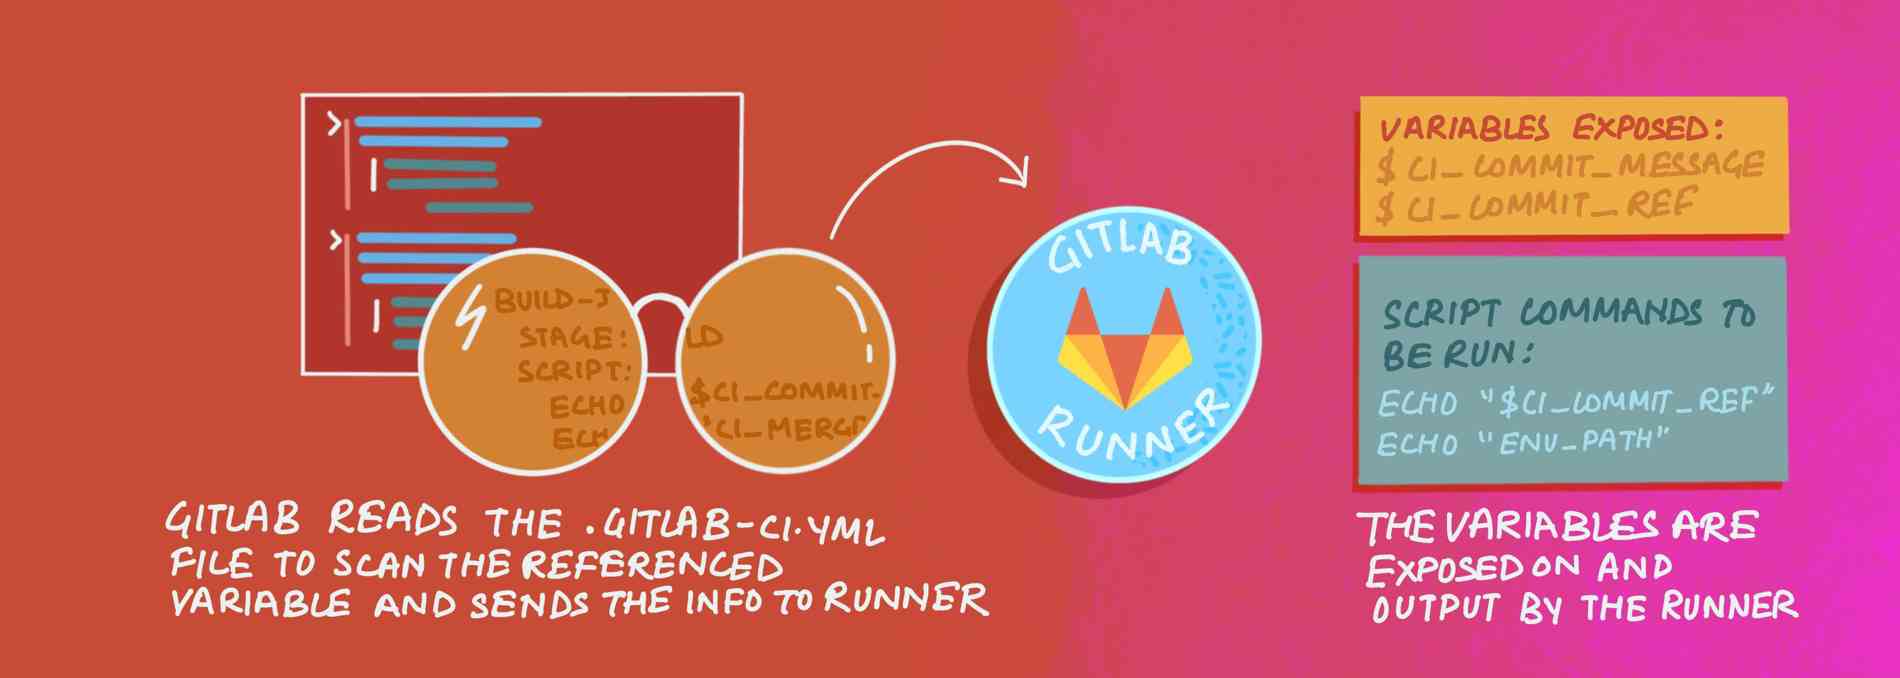 GitLab reads the .gitlab-ci.yml file to scan the referenced variable and sends the information to the Runner. The variables are exposed on and output by the runner.